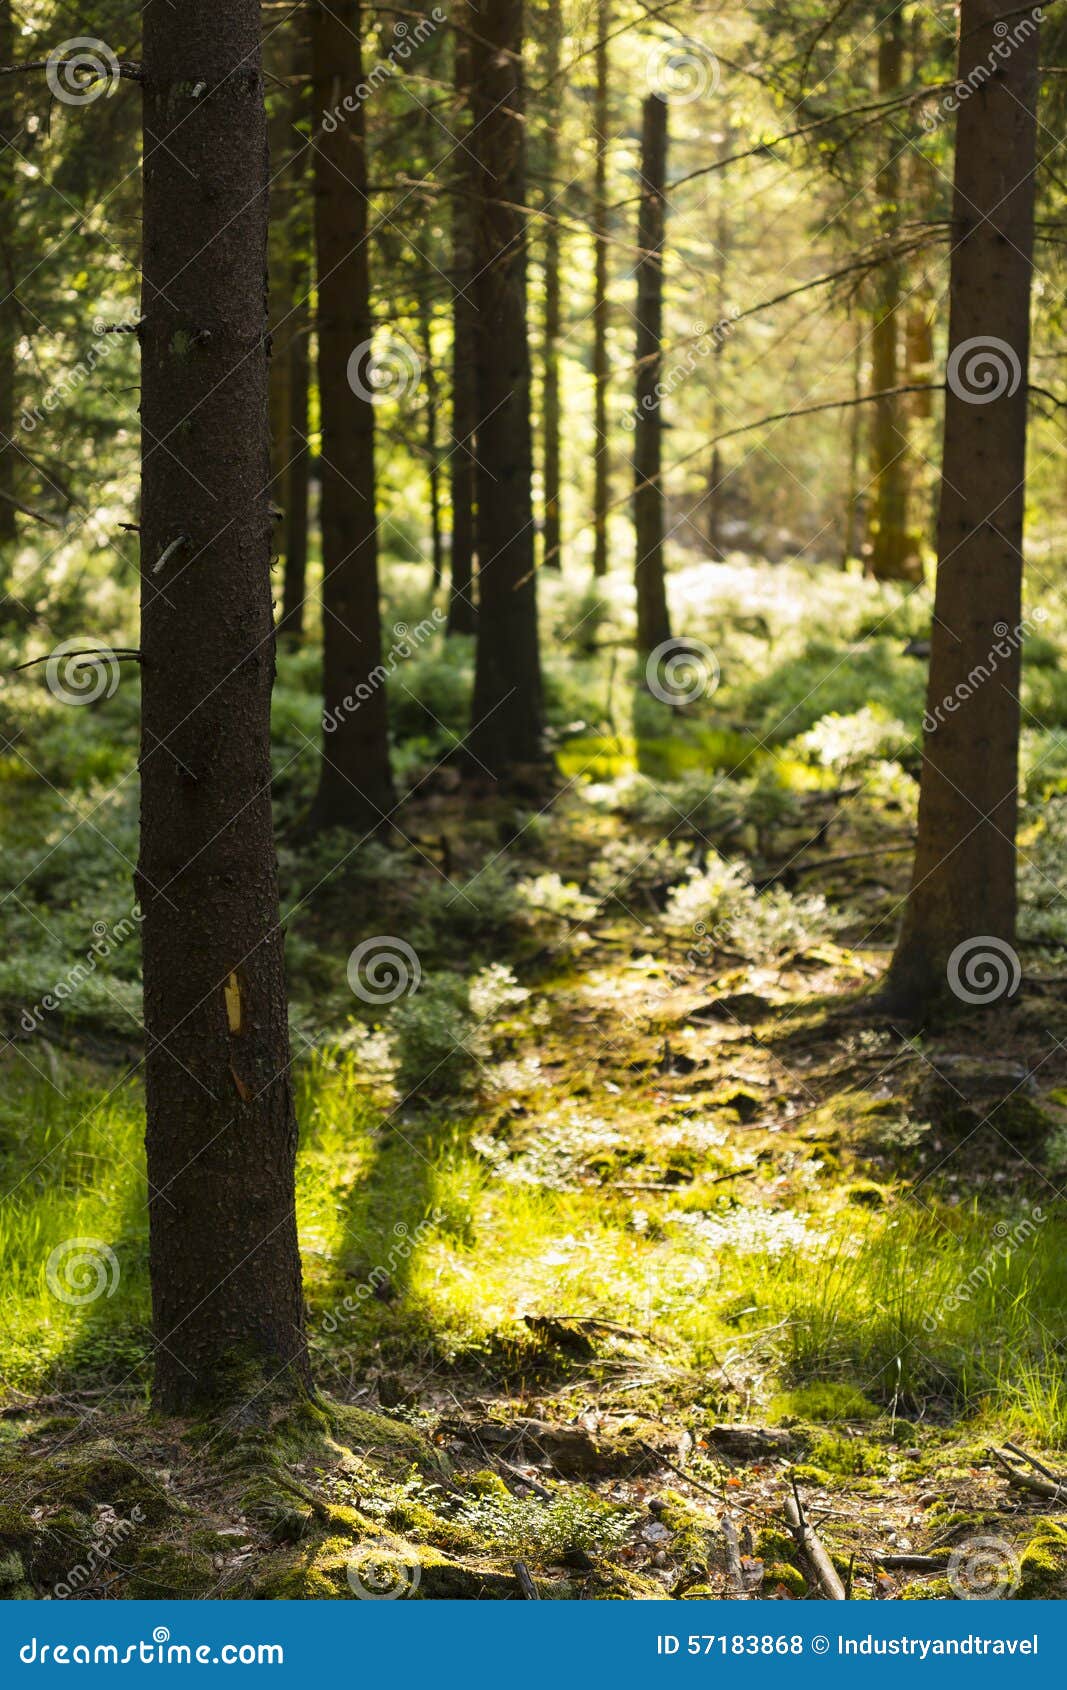 Evening Sunlight In The Forest. Warm evening sunlight shining through the trees in the forest of the Ardennes, Belgium